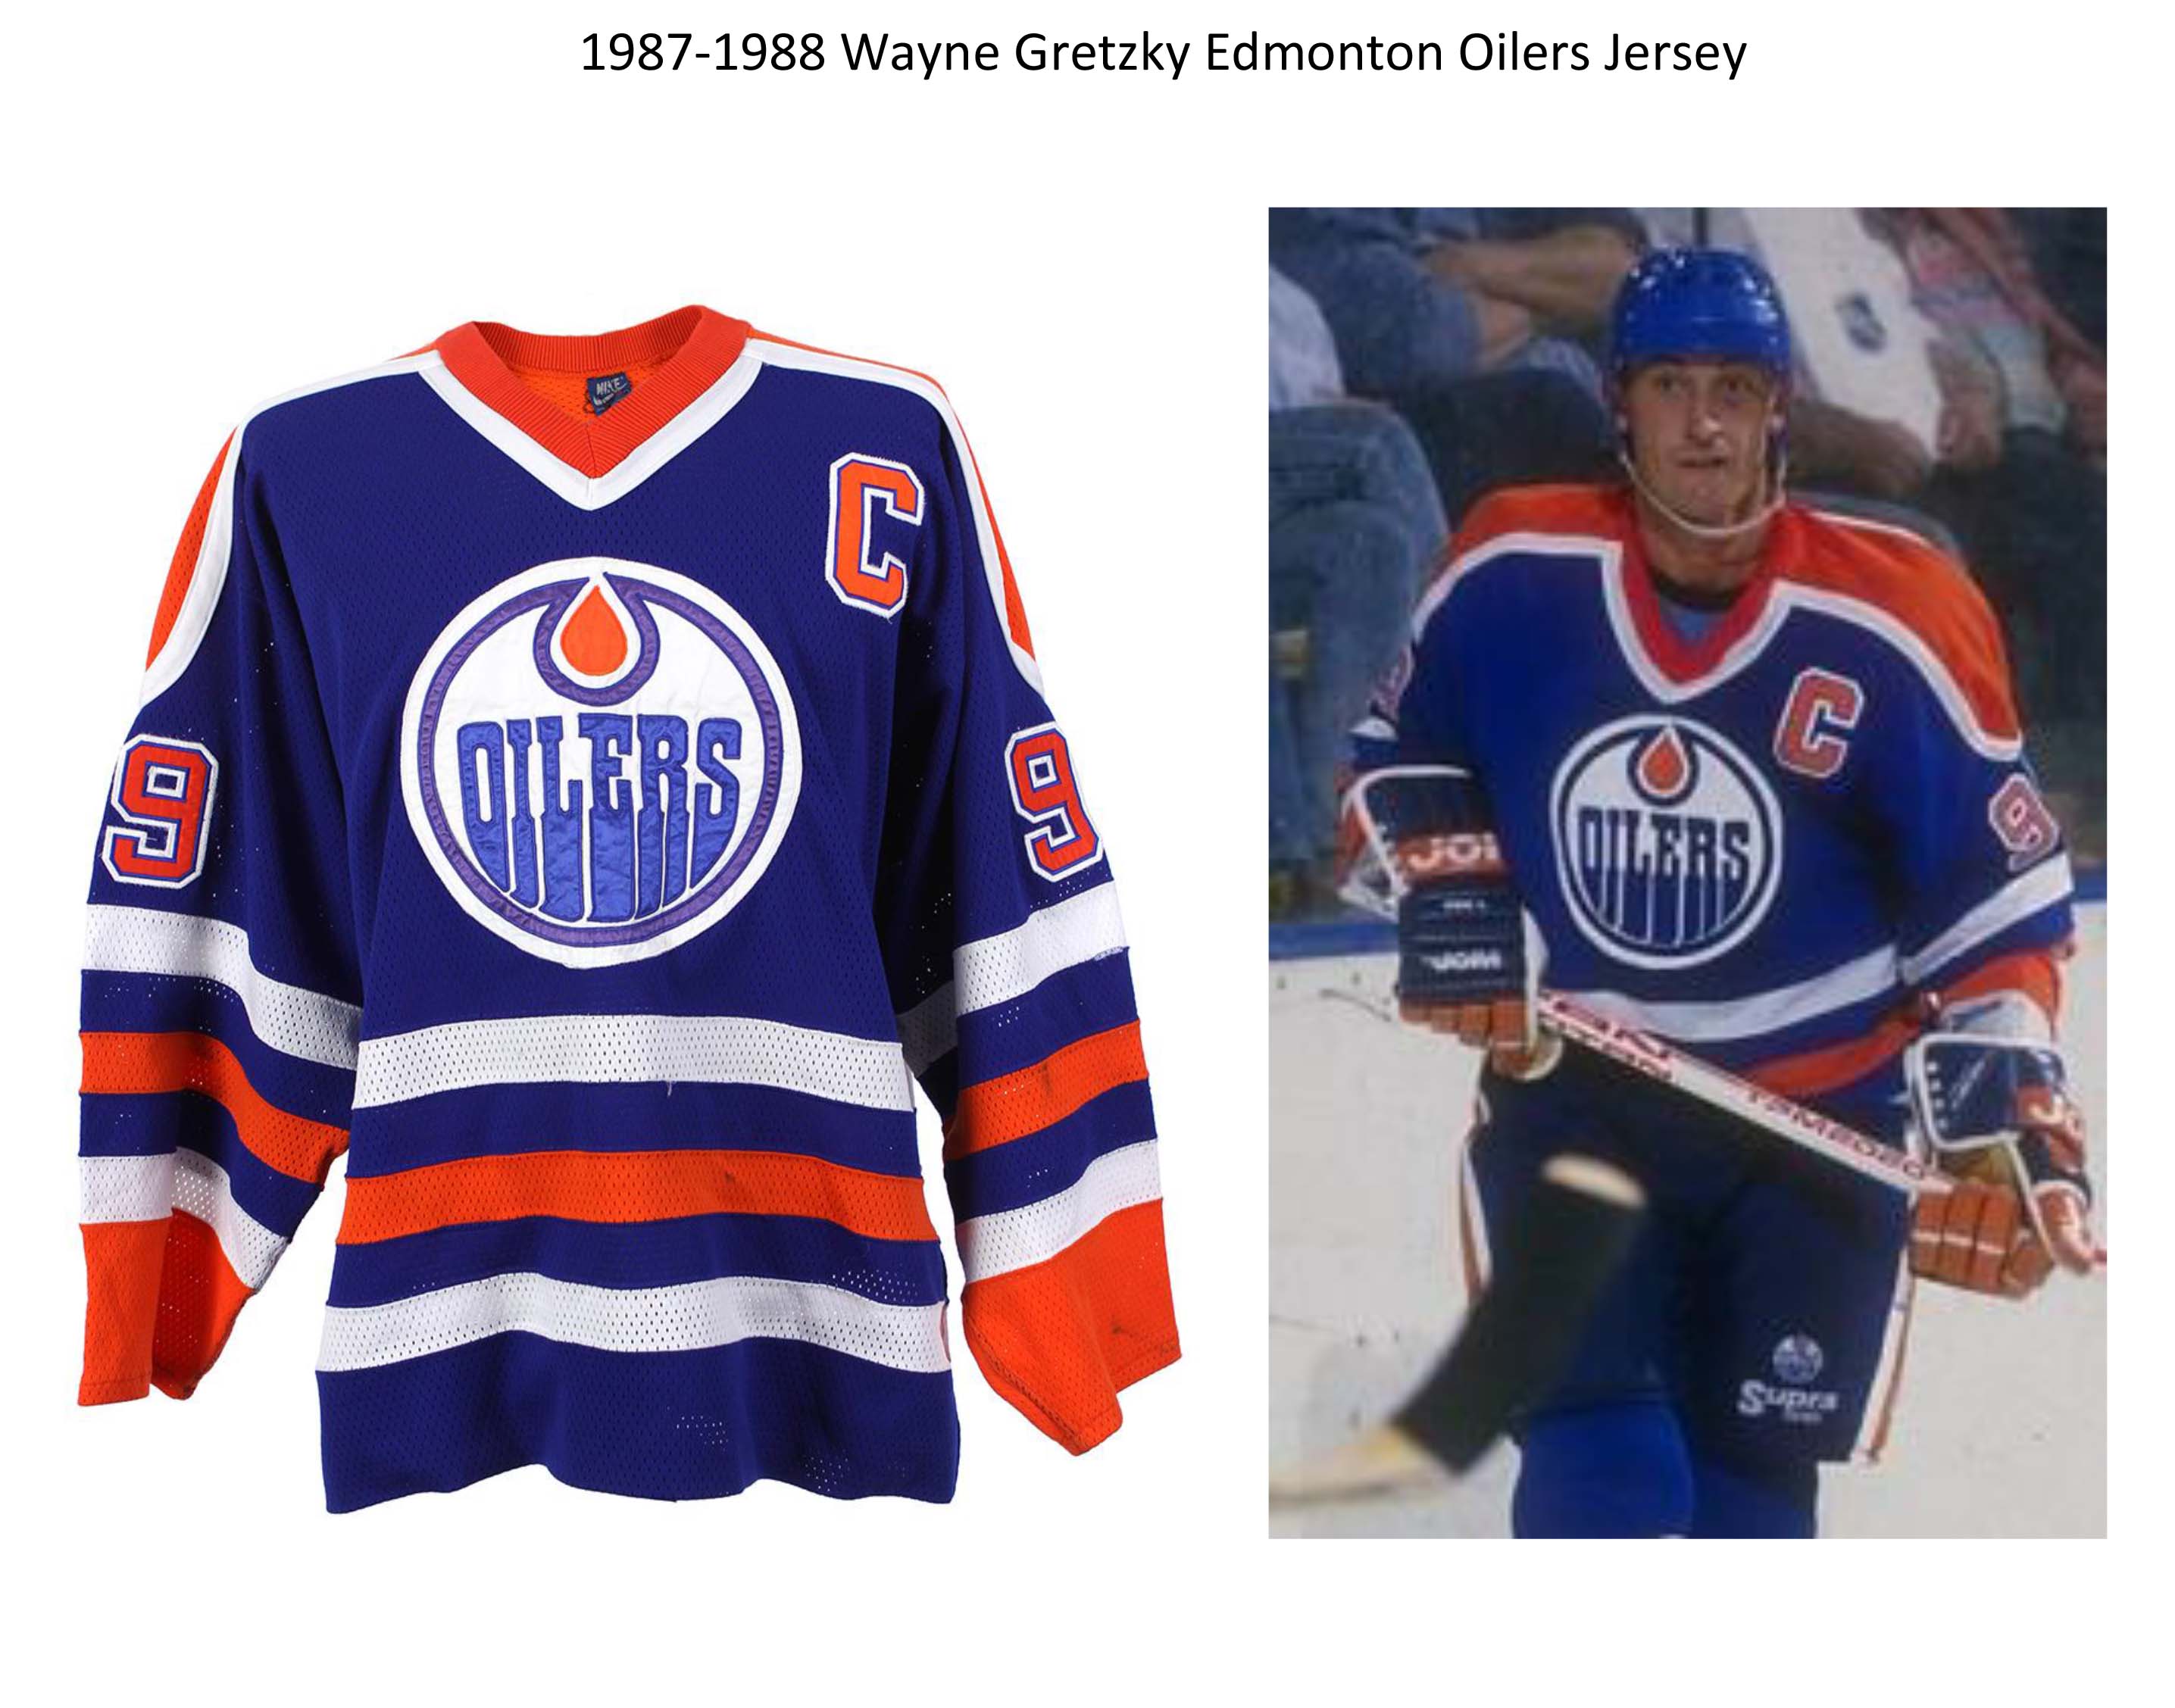 Oilers collectible jersey